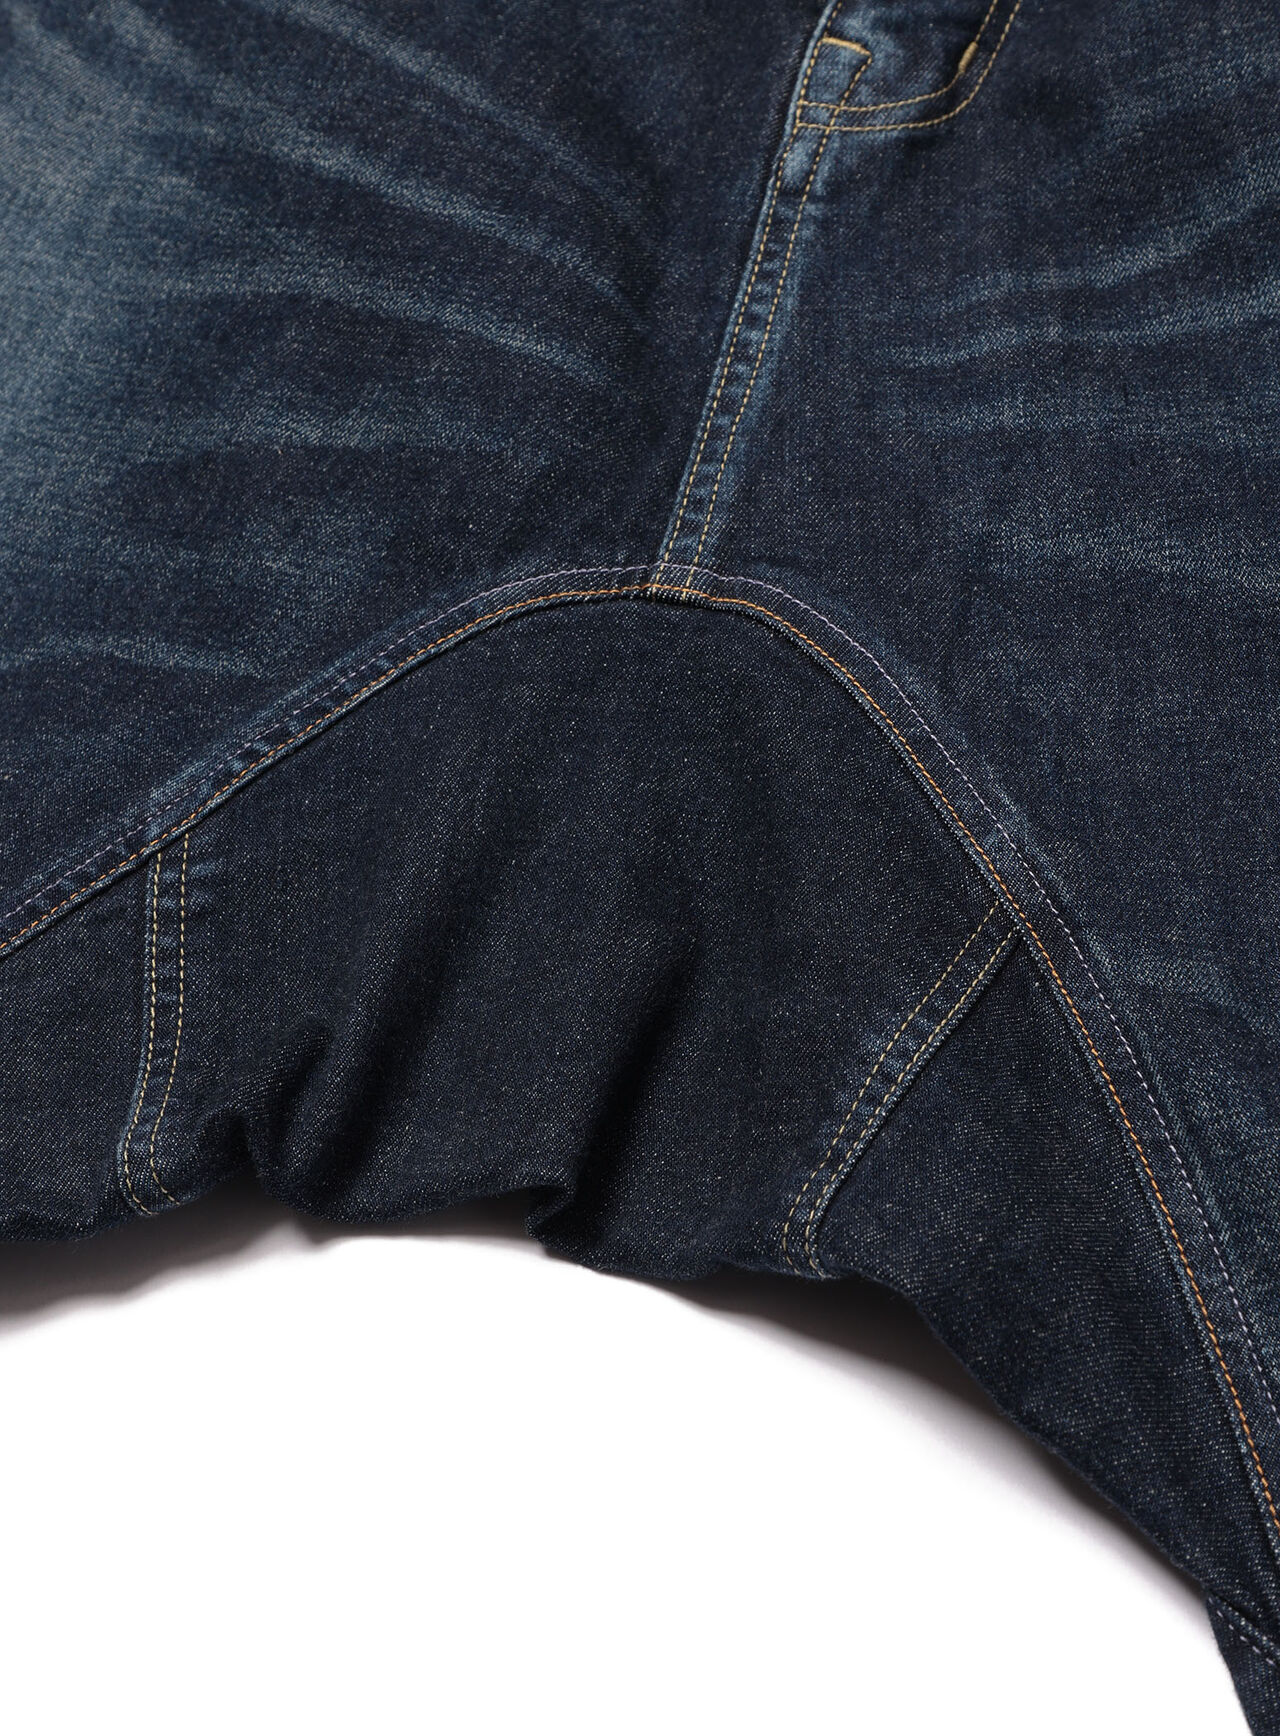 Jeans - Crotch 22-U2 3 years,M, large image number 4